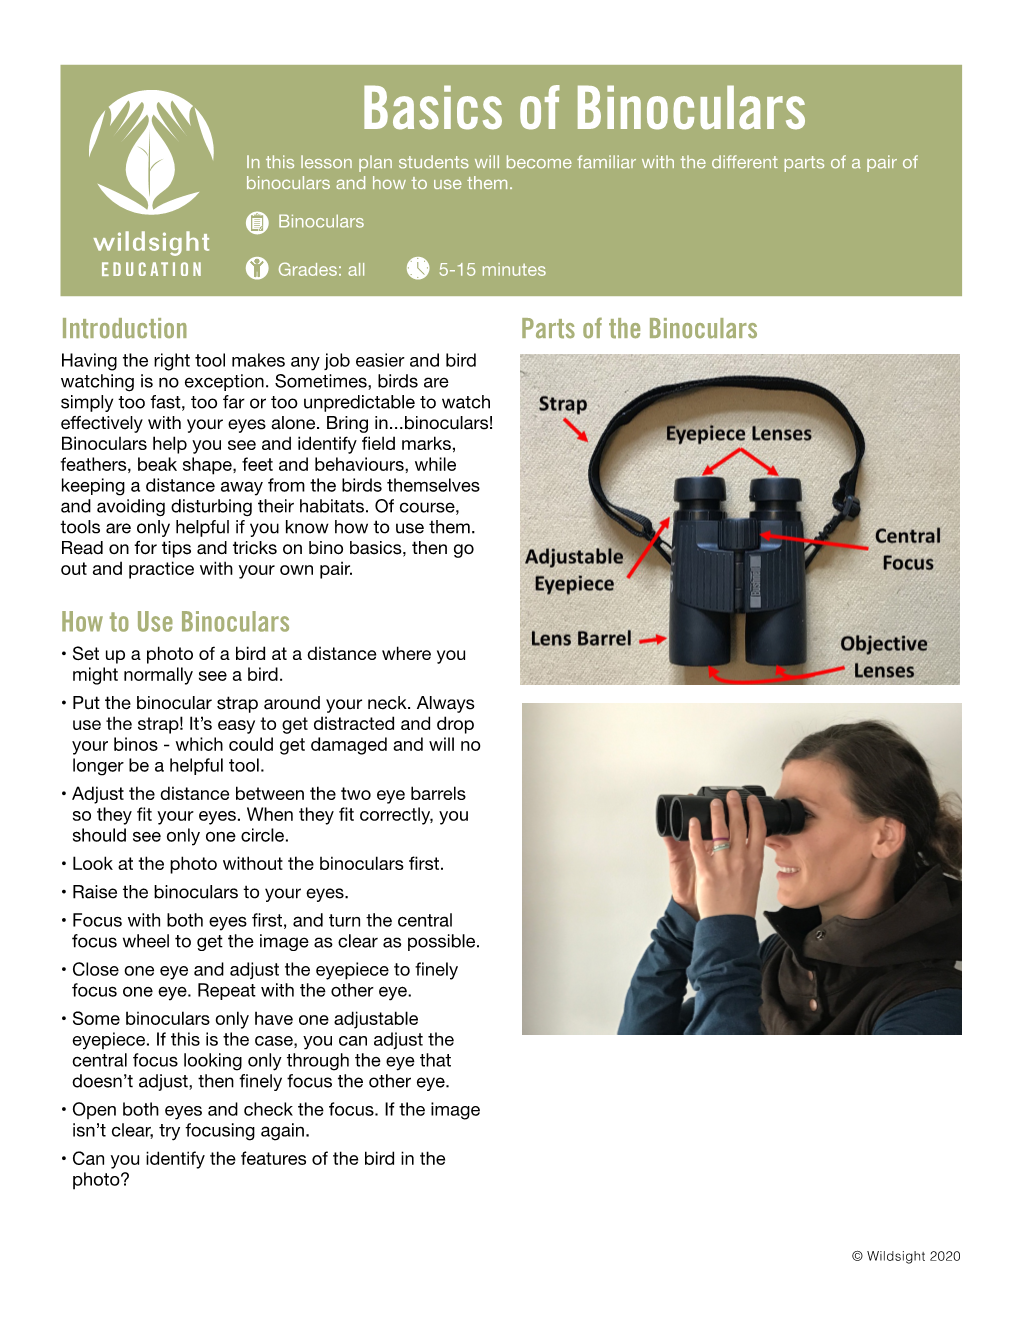 Basics of Binoculars in This Lesson Plan Students Will Become Familiar with the Different Parts of a Pair of Binoculars and How to Use Them